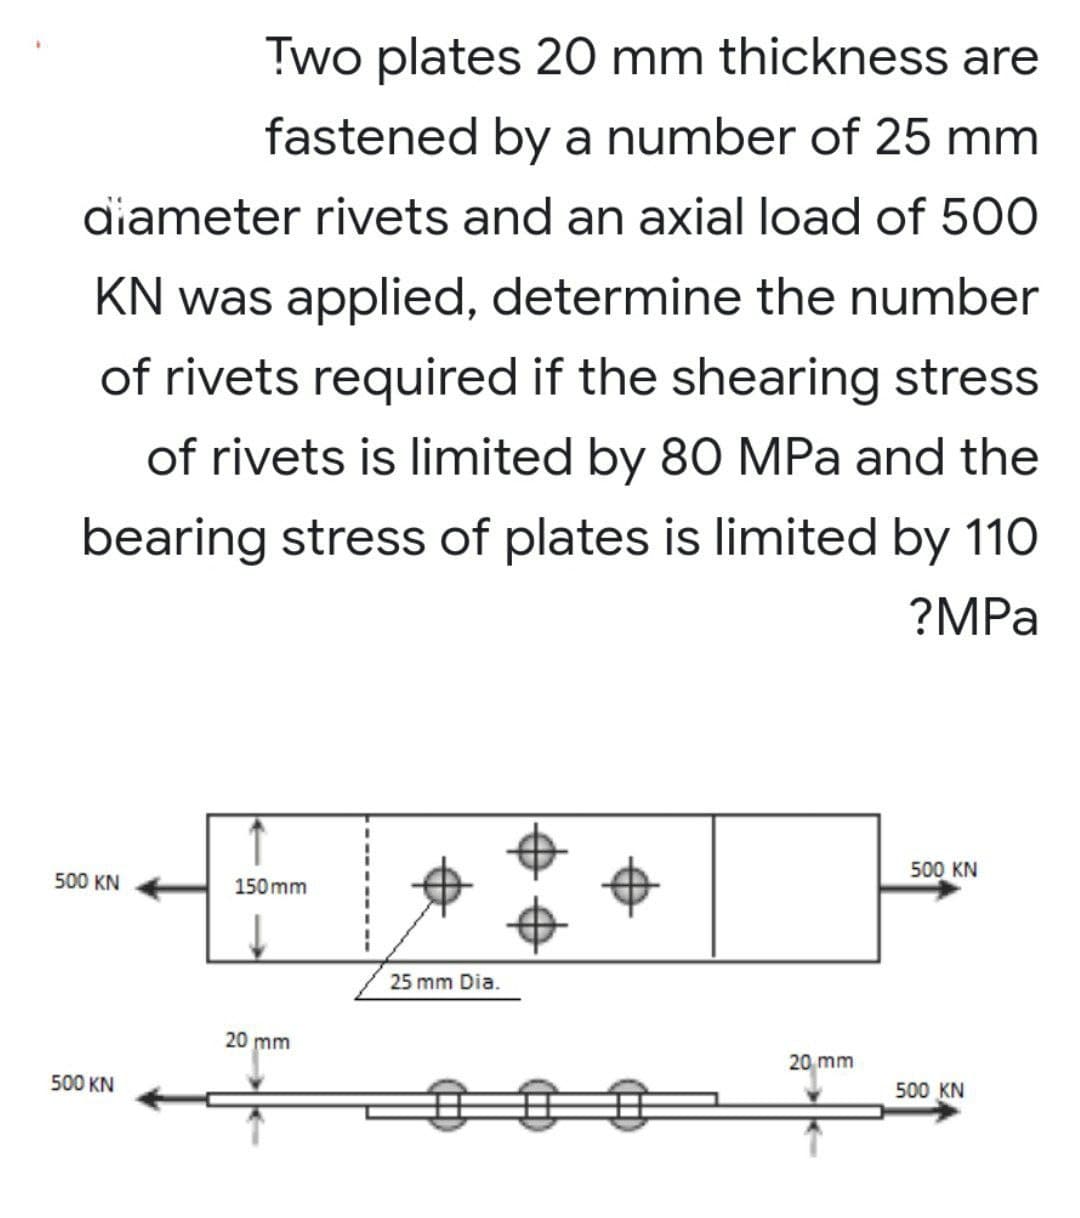 Two plates 20 mm thickness are
fastened by a number of 25 mm
diameter rivets and an axial load of 500
KN was applied, determine the number
of rivets required if the shearing stress
of rivets is limited by 80 MPa and the
bearing stress of plates is limited by 110
?MPa
500 KN
500 KN
150mm
25 mm Dia.
20 mm
500 KN
20 mm
500 KN